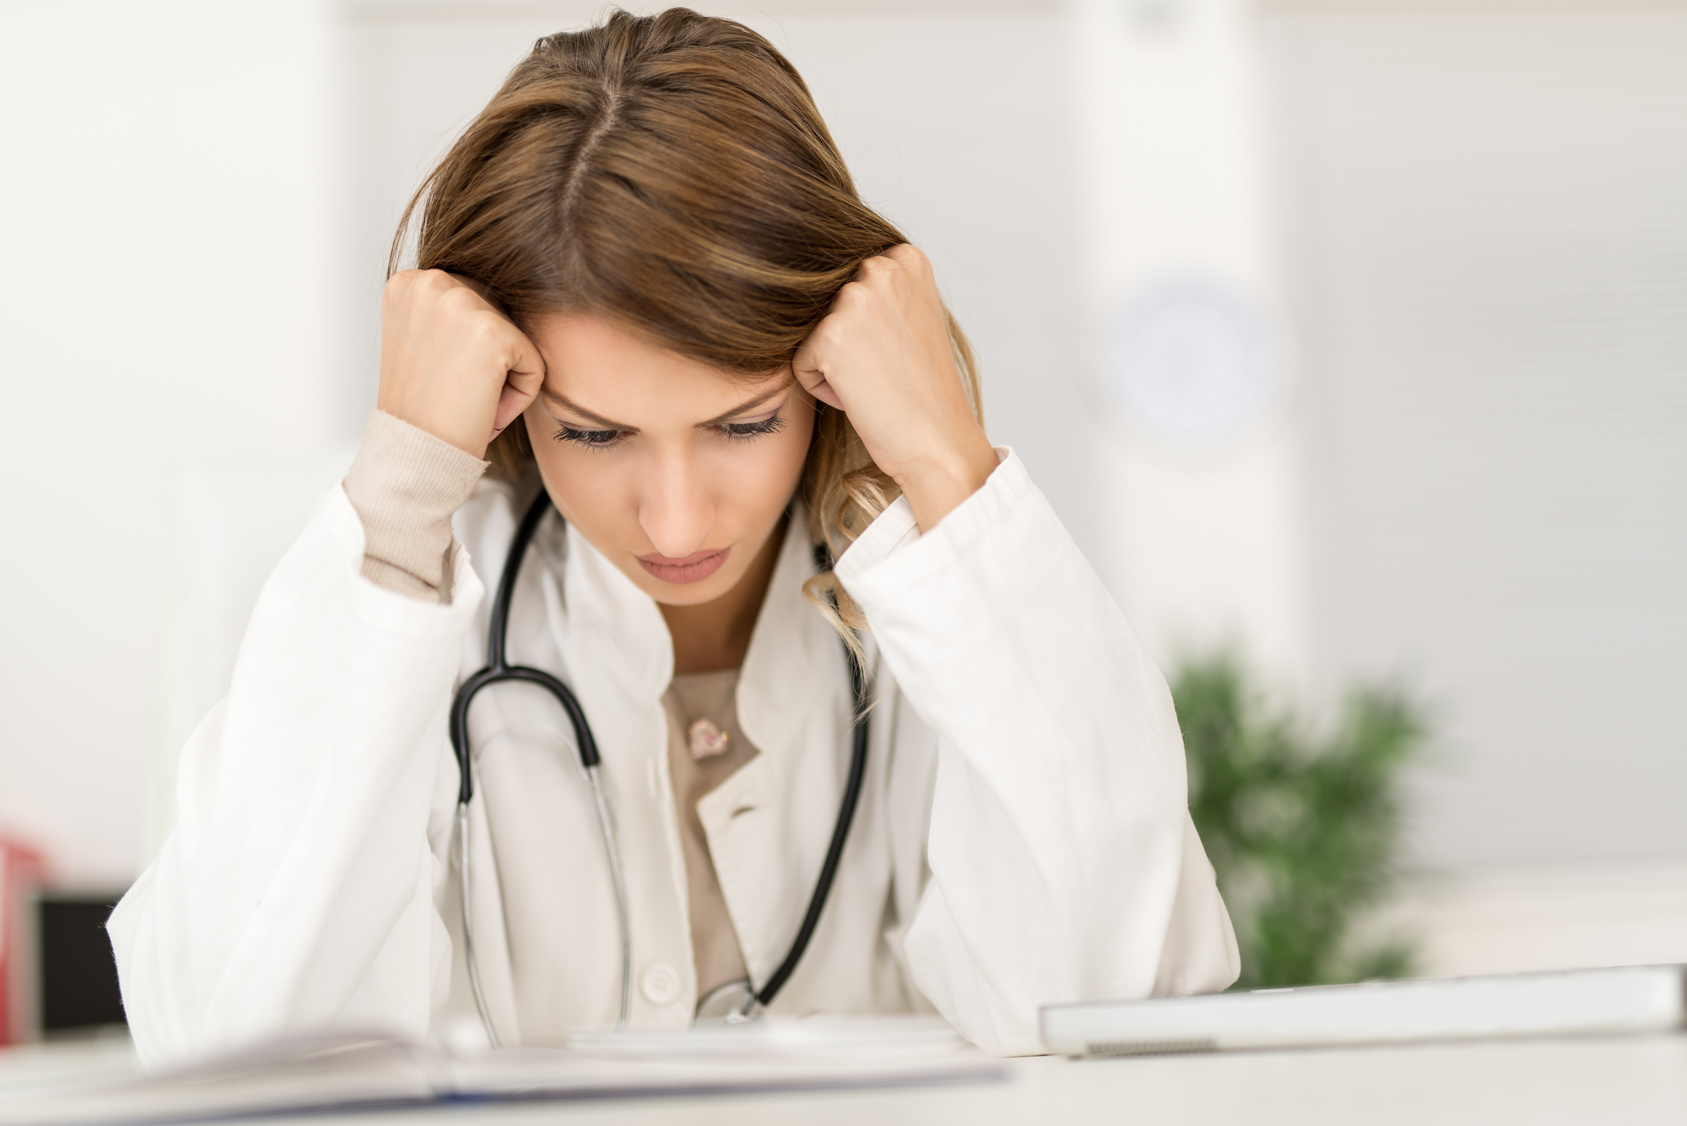 Medical Errors Linked to Physician Depression